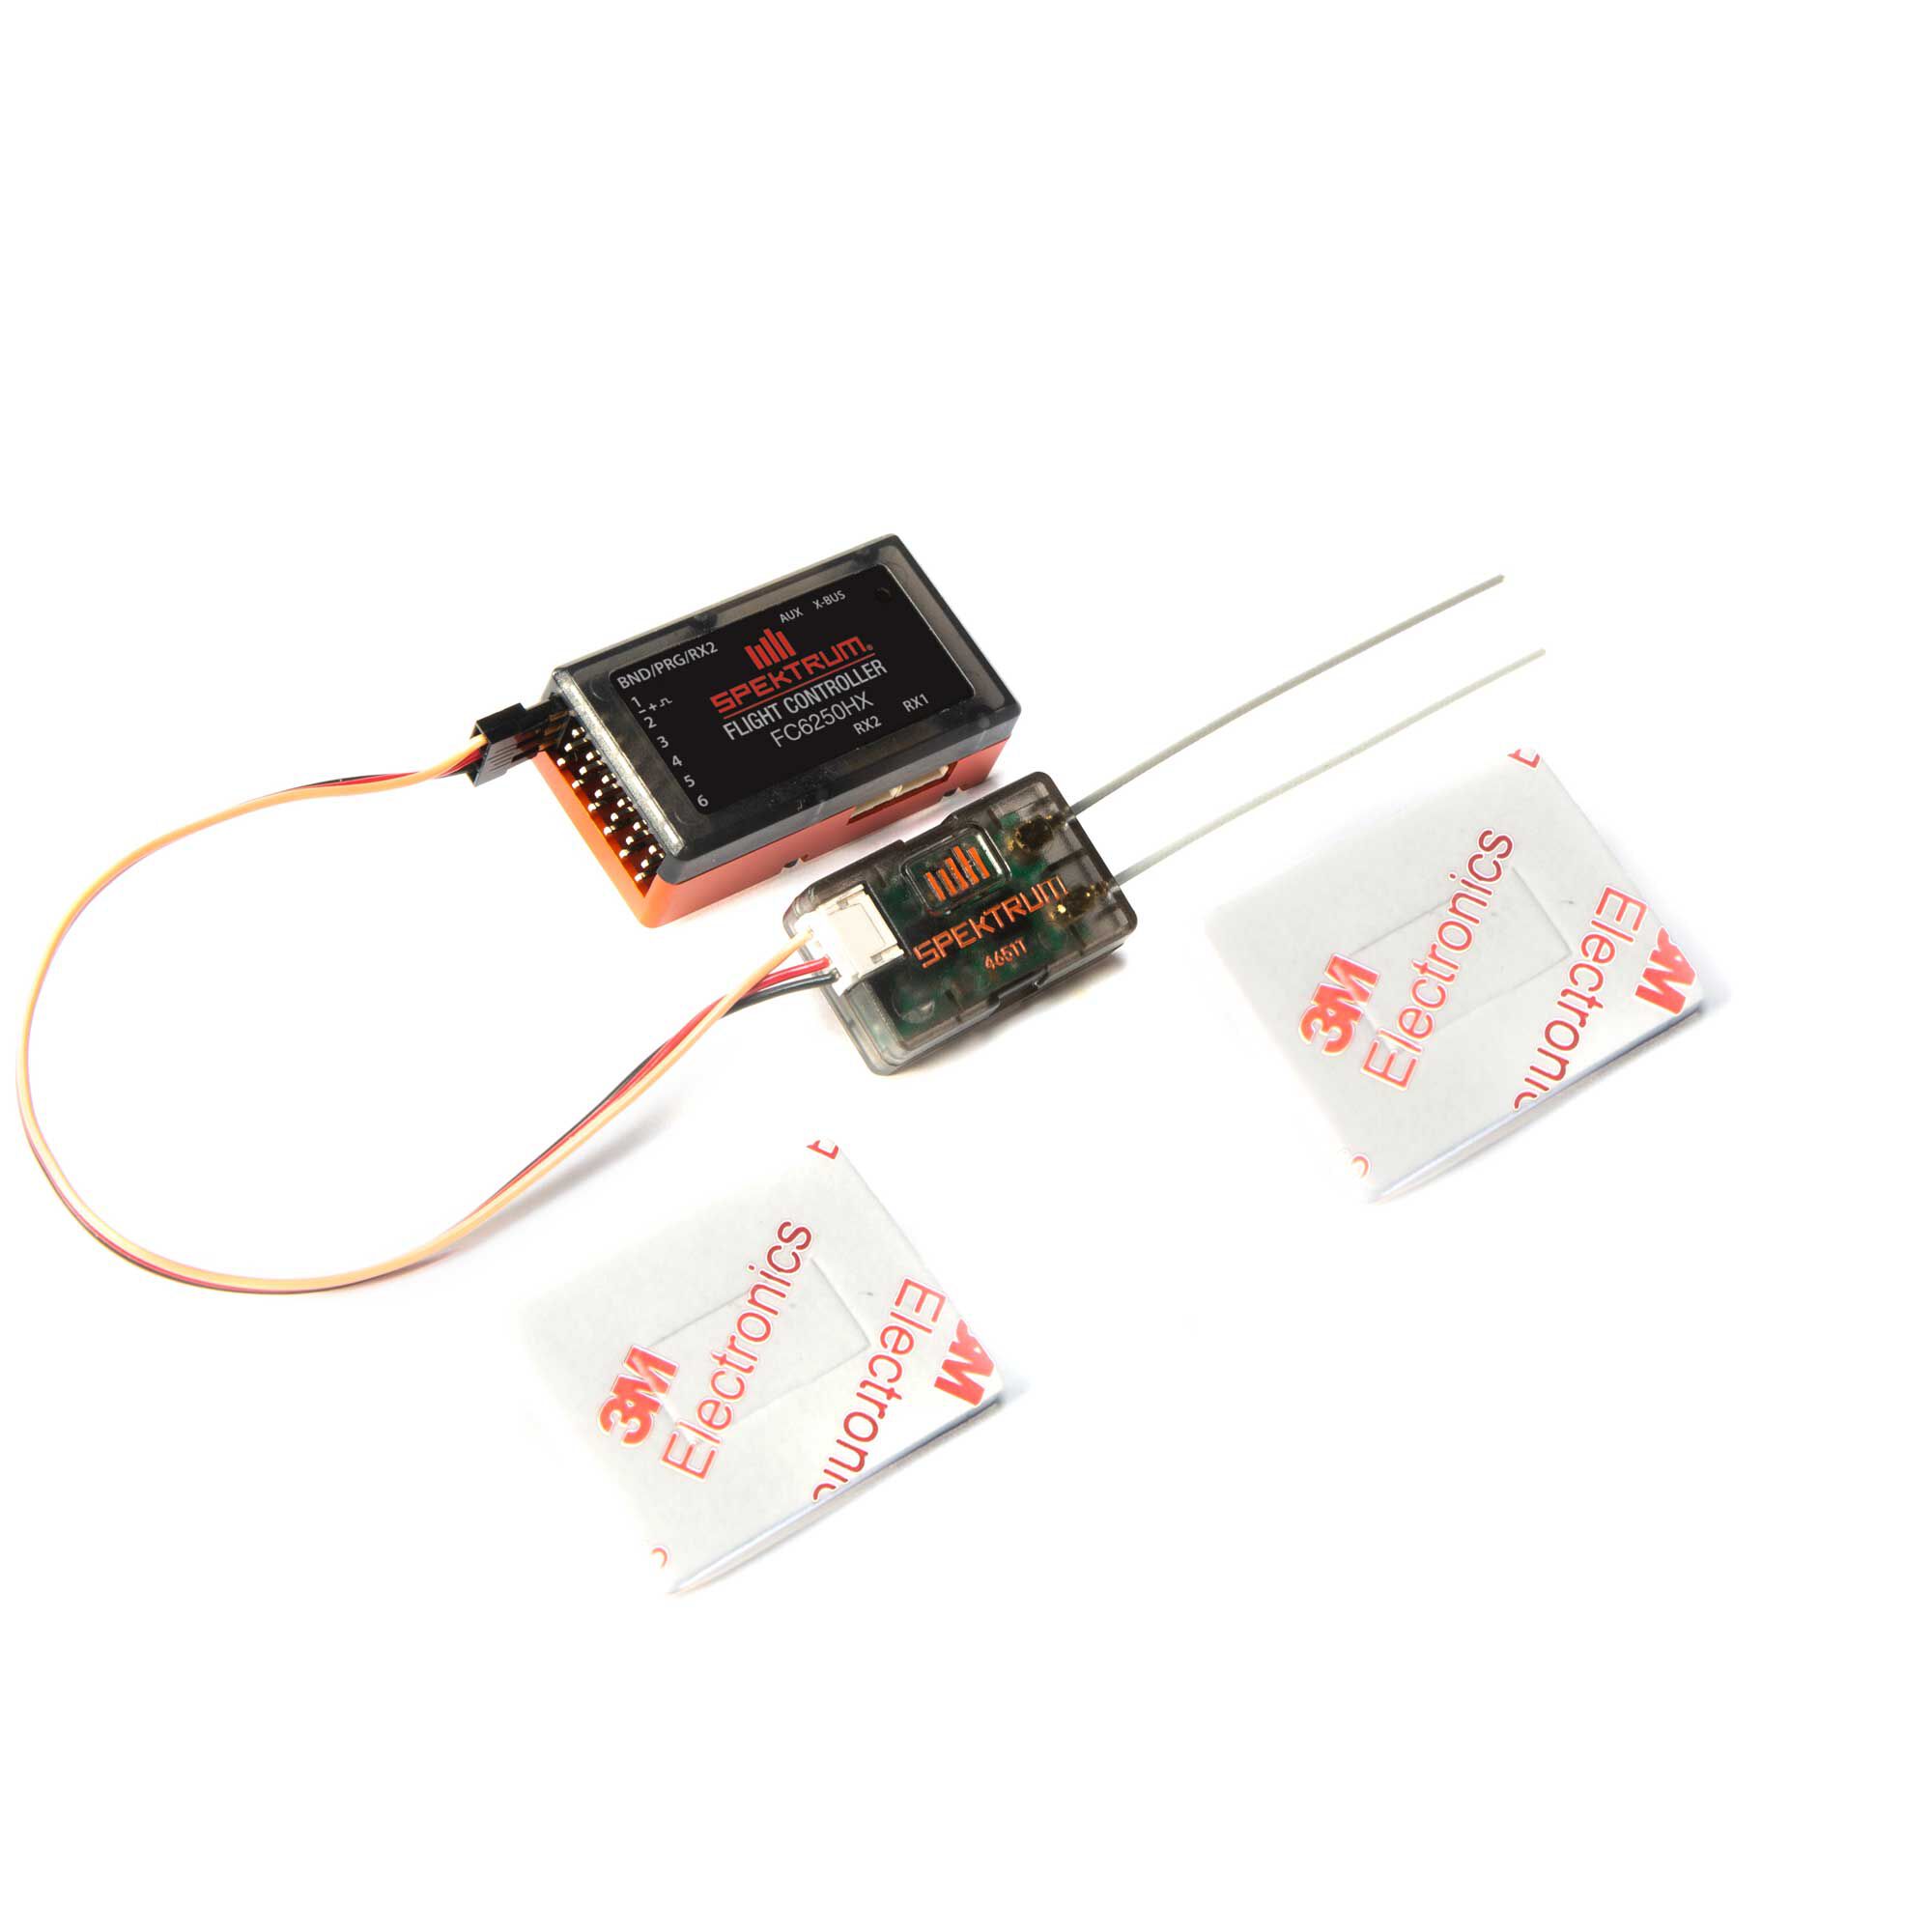 rc helicopter flight controller